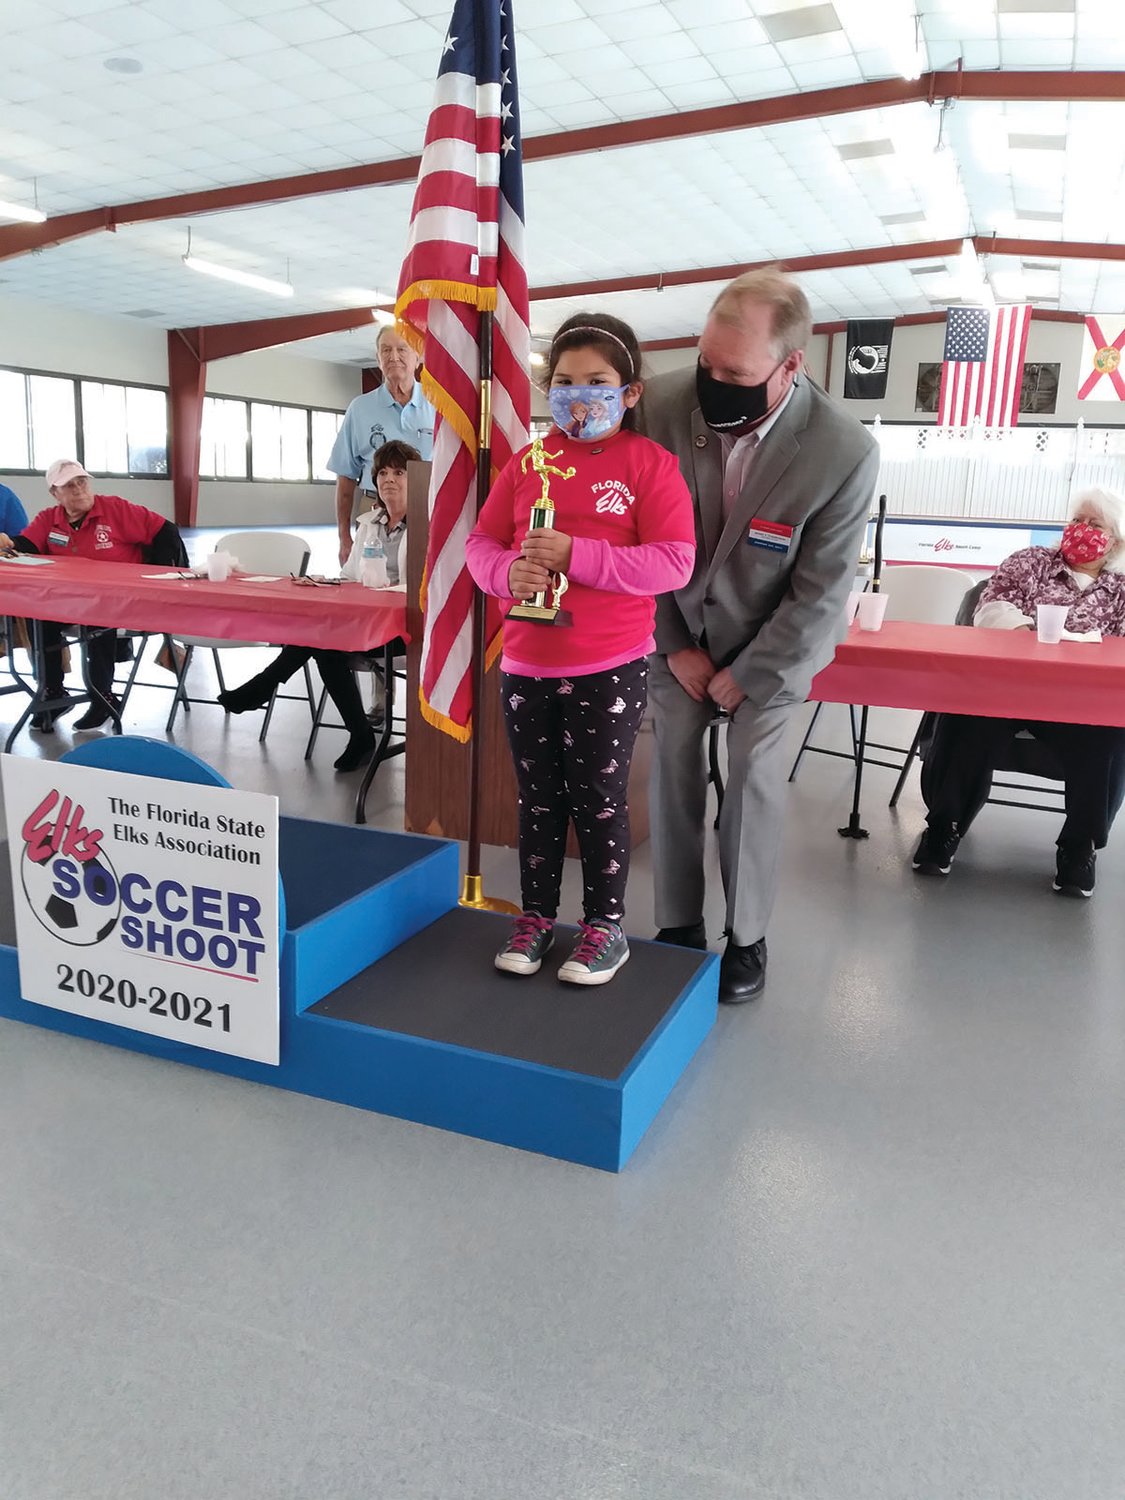 Sofia Velasco won second place at the Elks State Soccer Shoot in Umatilla, Florida at the Elks Youth Camp.